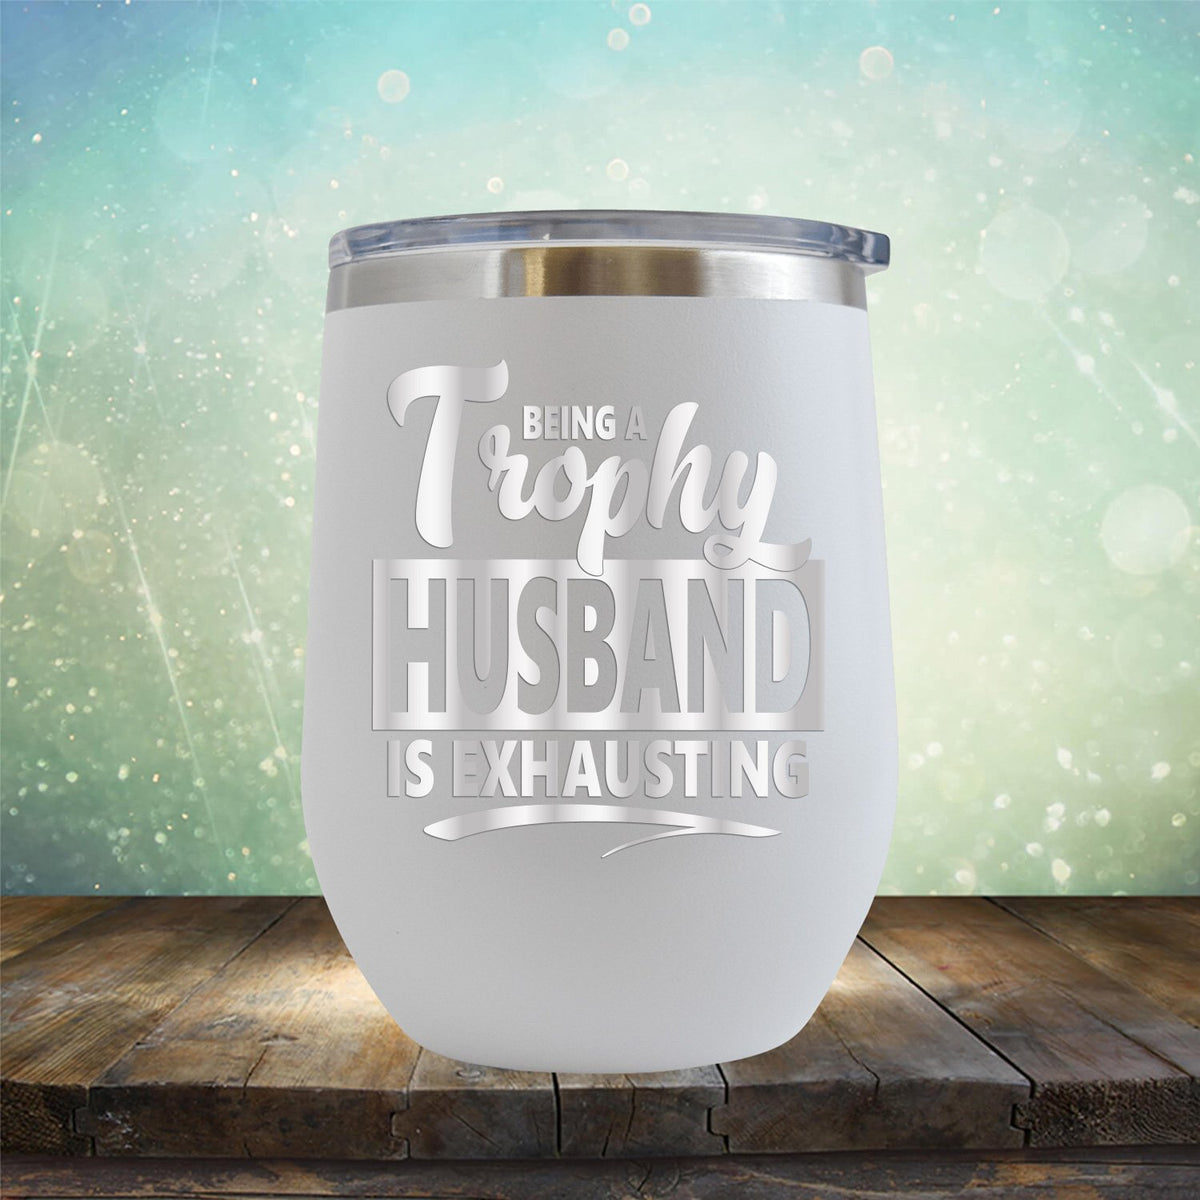 Being A Trophy Husband is Exhausting - Stemless Wine Cup